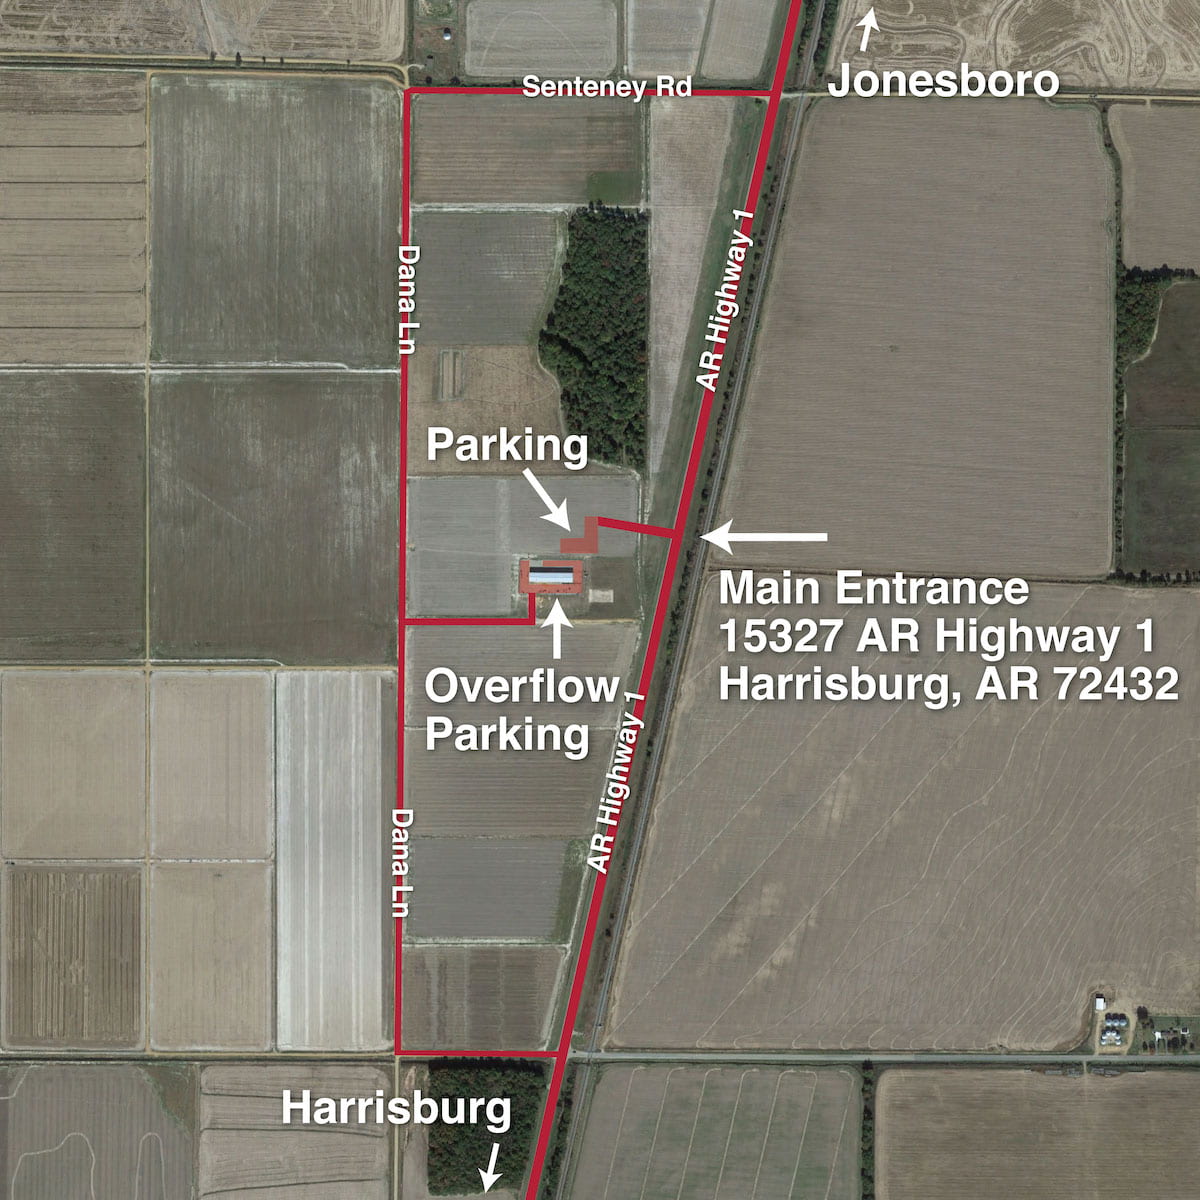 An overhead GPS map showing the roads and parking lots around the Northeast Rice Research and Extension Center. A main entrance is designated at 15327 AR Highway 1, Harrisburg, AR 72432. An arrow points to Jonesboro to the north and Harrisburg to the south.